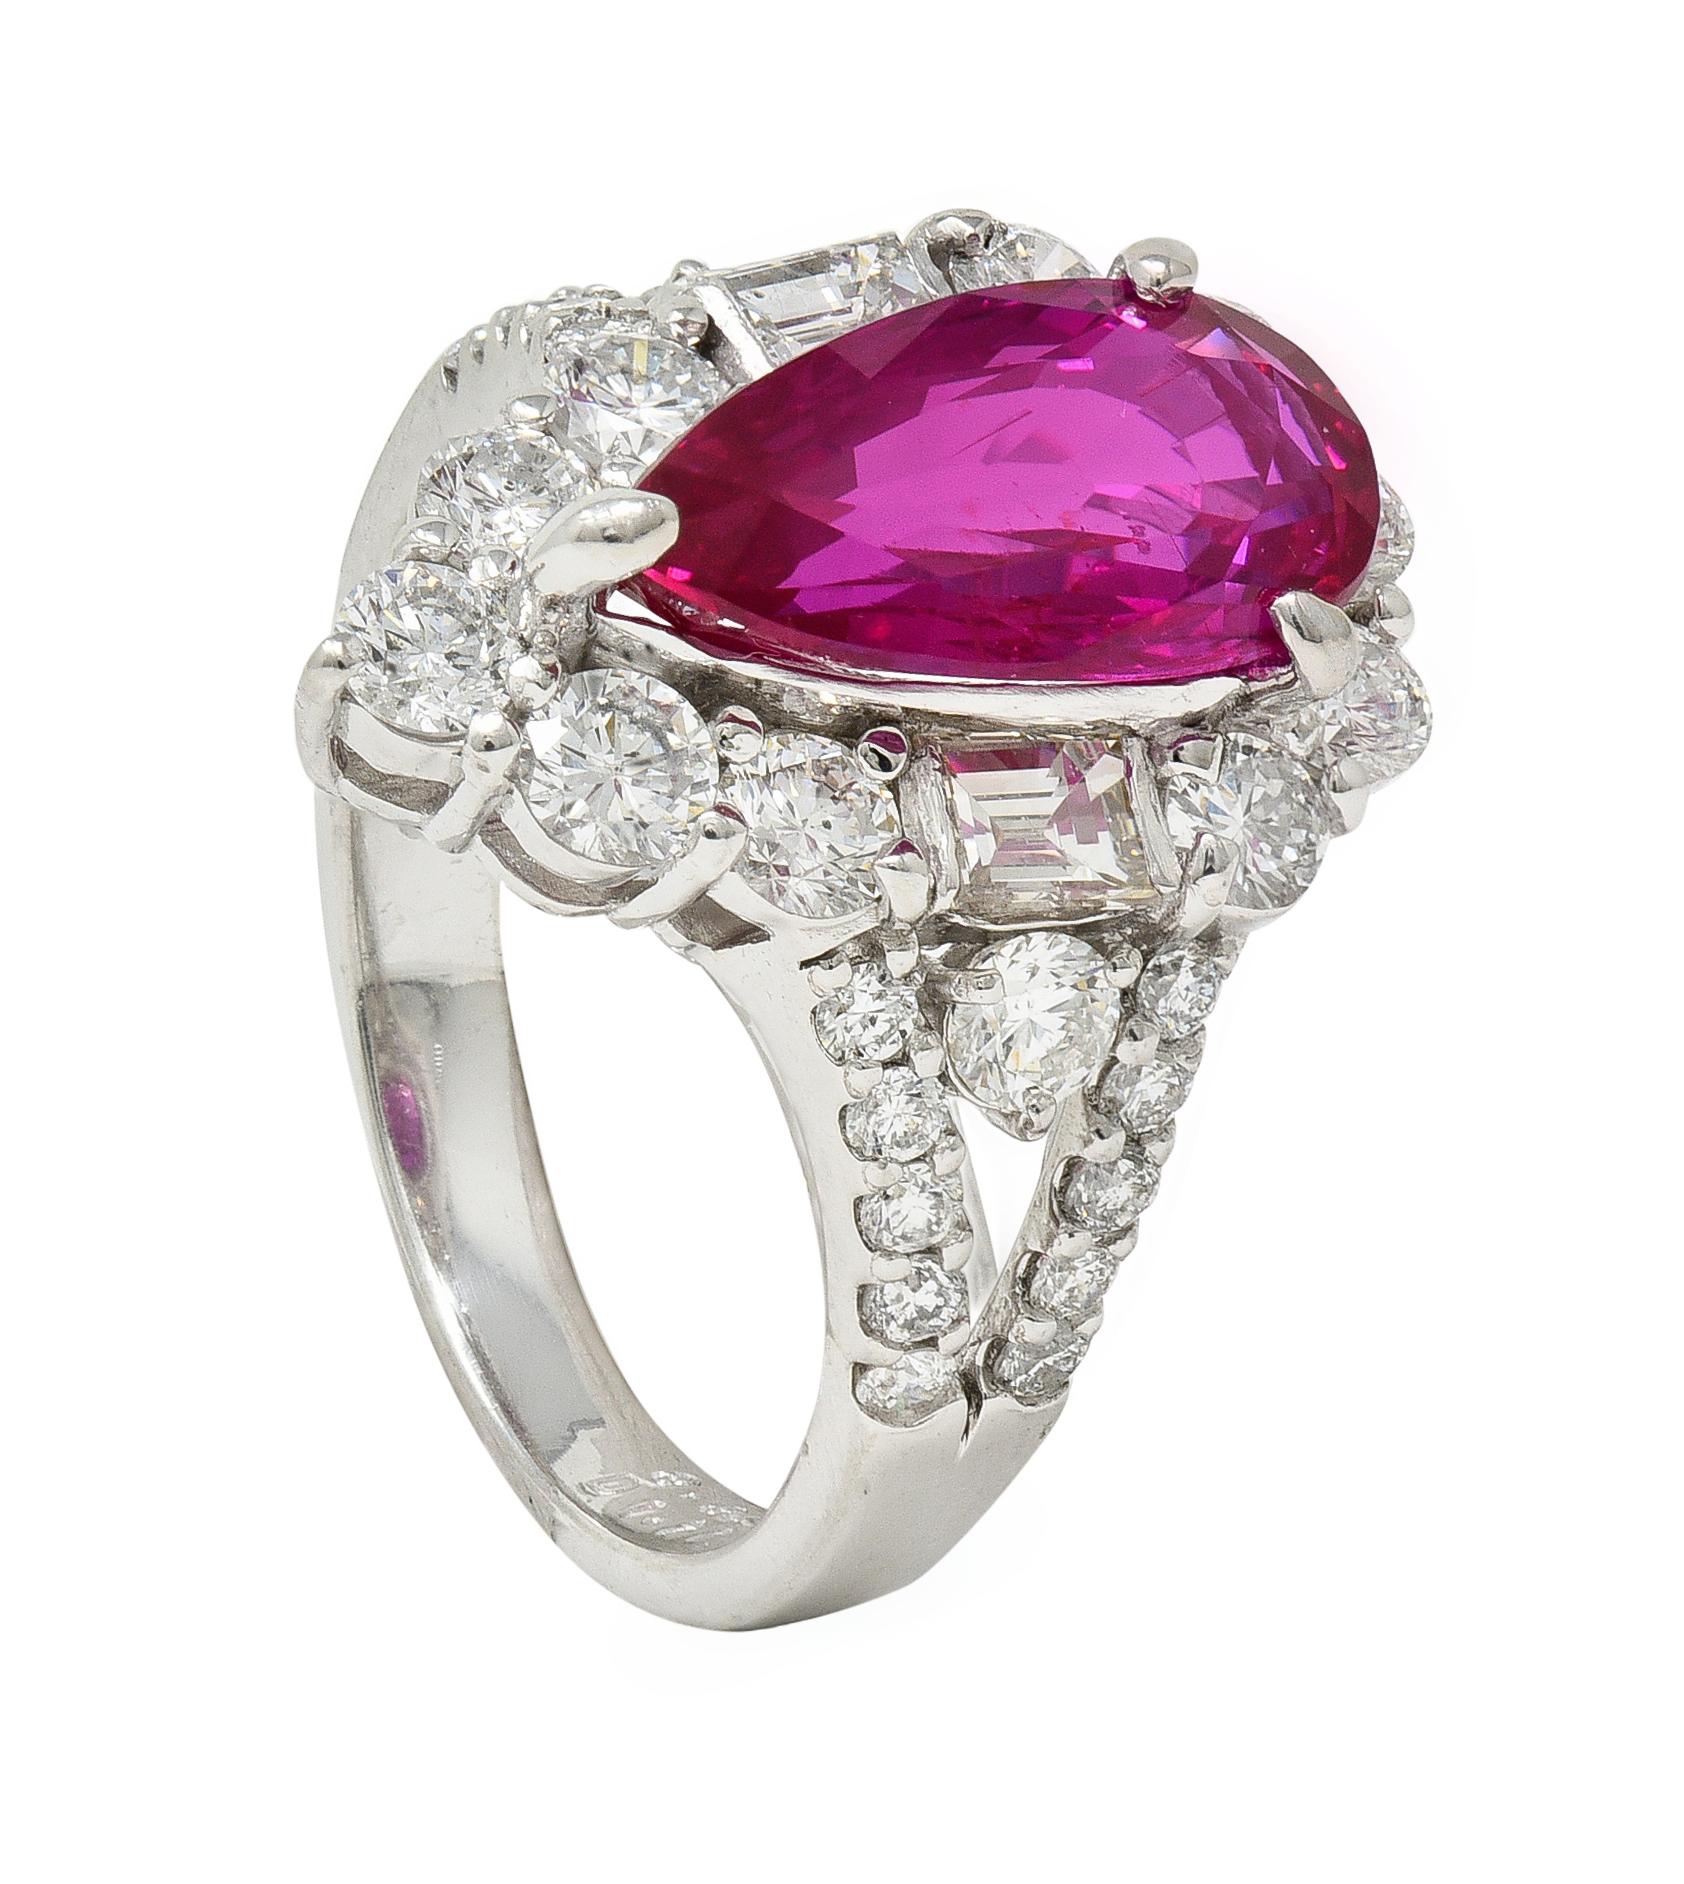 Contemporary 5.11 CTW Pear Cut Mozambique No Heat Ruby Diamond Ring AGL In Excellent Condition For Sale In Philadelphia, PA